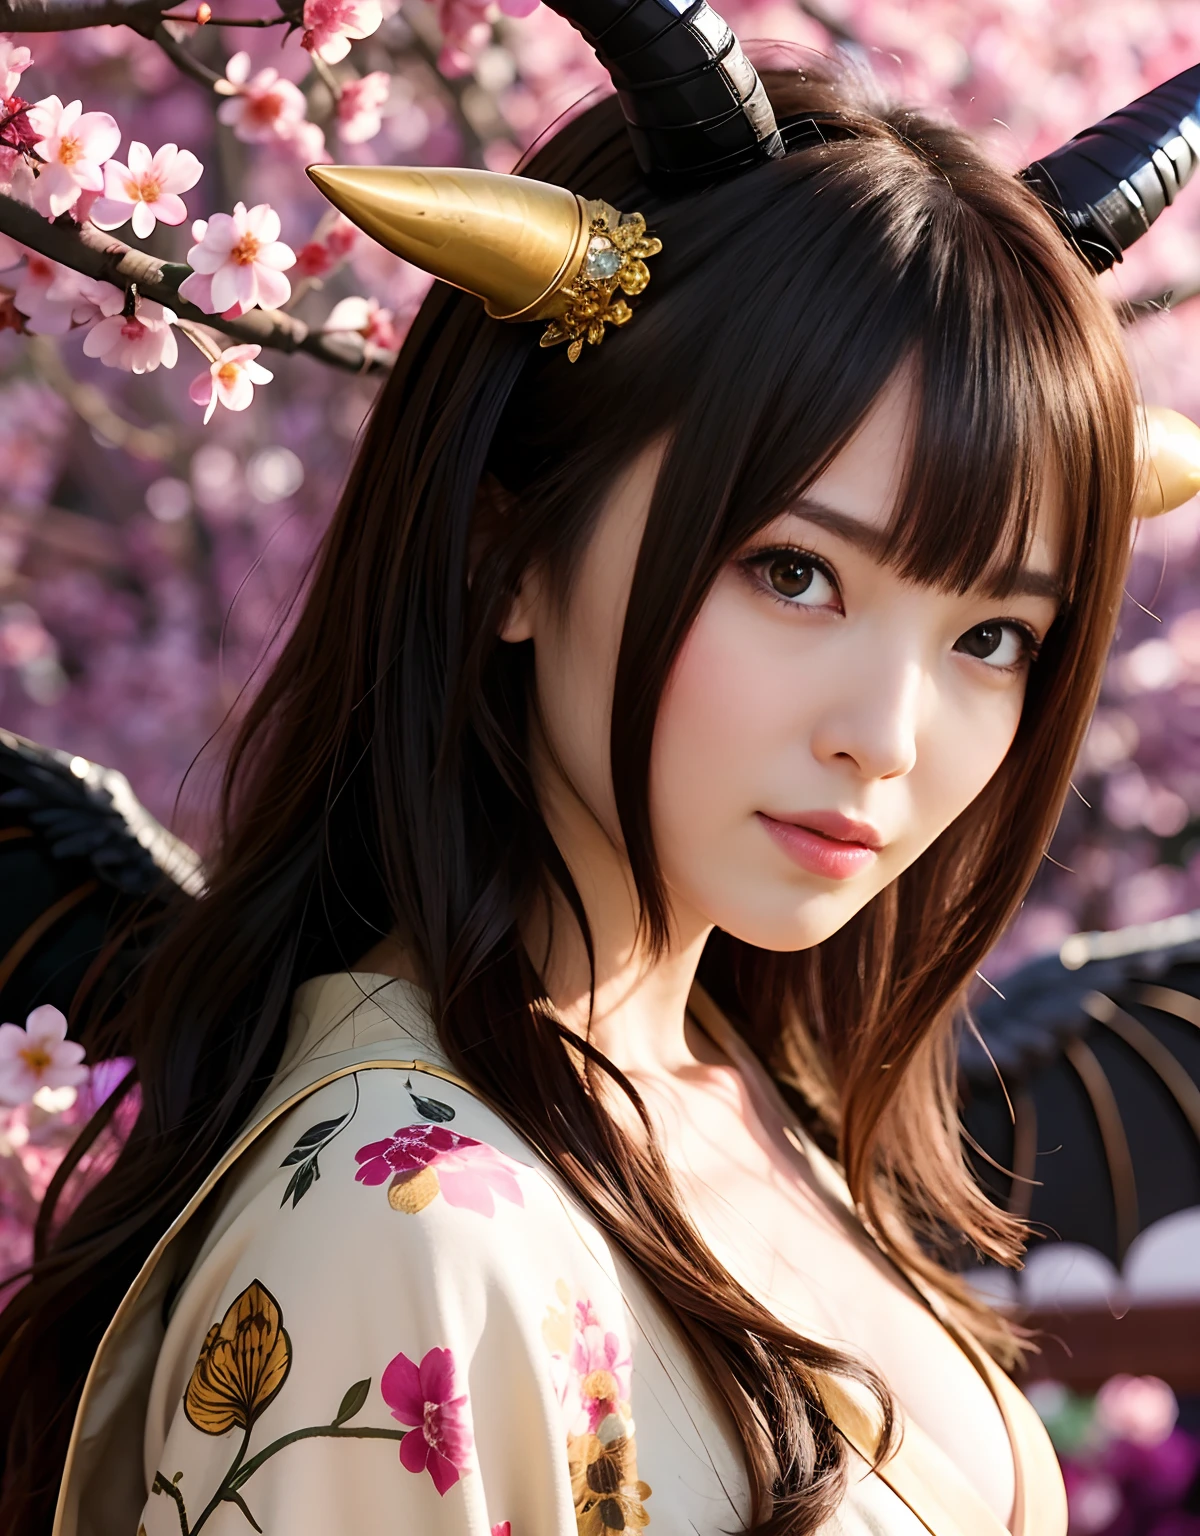 ((World of Darkness)),Professional , ​masterpiece、top-quality、photos realistic , depth of fields 、（sexypose）、(Background of cherry blossoms in full bloom),（Ultimate Beauty）、A dark-haired、（)、（Kimono with beautiful pattern）、（Night background）、（（Wearing a skeleton helmet））,(Wear a beautiful kimono),（Wear a beautiful kimono with colorful floral patterns）、Jewel Gold Weapon、Particles of light),（Has a devil's mask）、Gorgeous gold weapons ,Skeleton population、（（ Gorgeous Dragon Sword）） , （a dark night）,,（maikurobikini） 、（（Black Haired Beautiful Girl））、（Castle background）、（demonic wings）、（（Gangle's forest background））、Beautiful Caucasian beauty、１a person、dynamic ungle,(((Two devil's horns on the head)))、Smaller head、Idle Smile、Thin and beautiful female handystical expression、Light Effects、intense fighting、Wind-effect、magic circles、With the legendary magic wand、Dragon's tail、